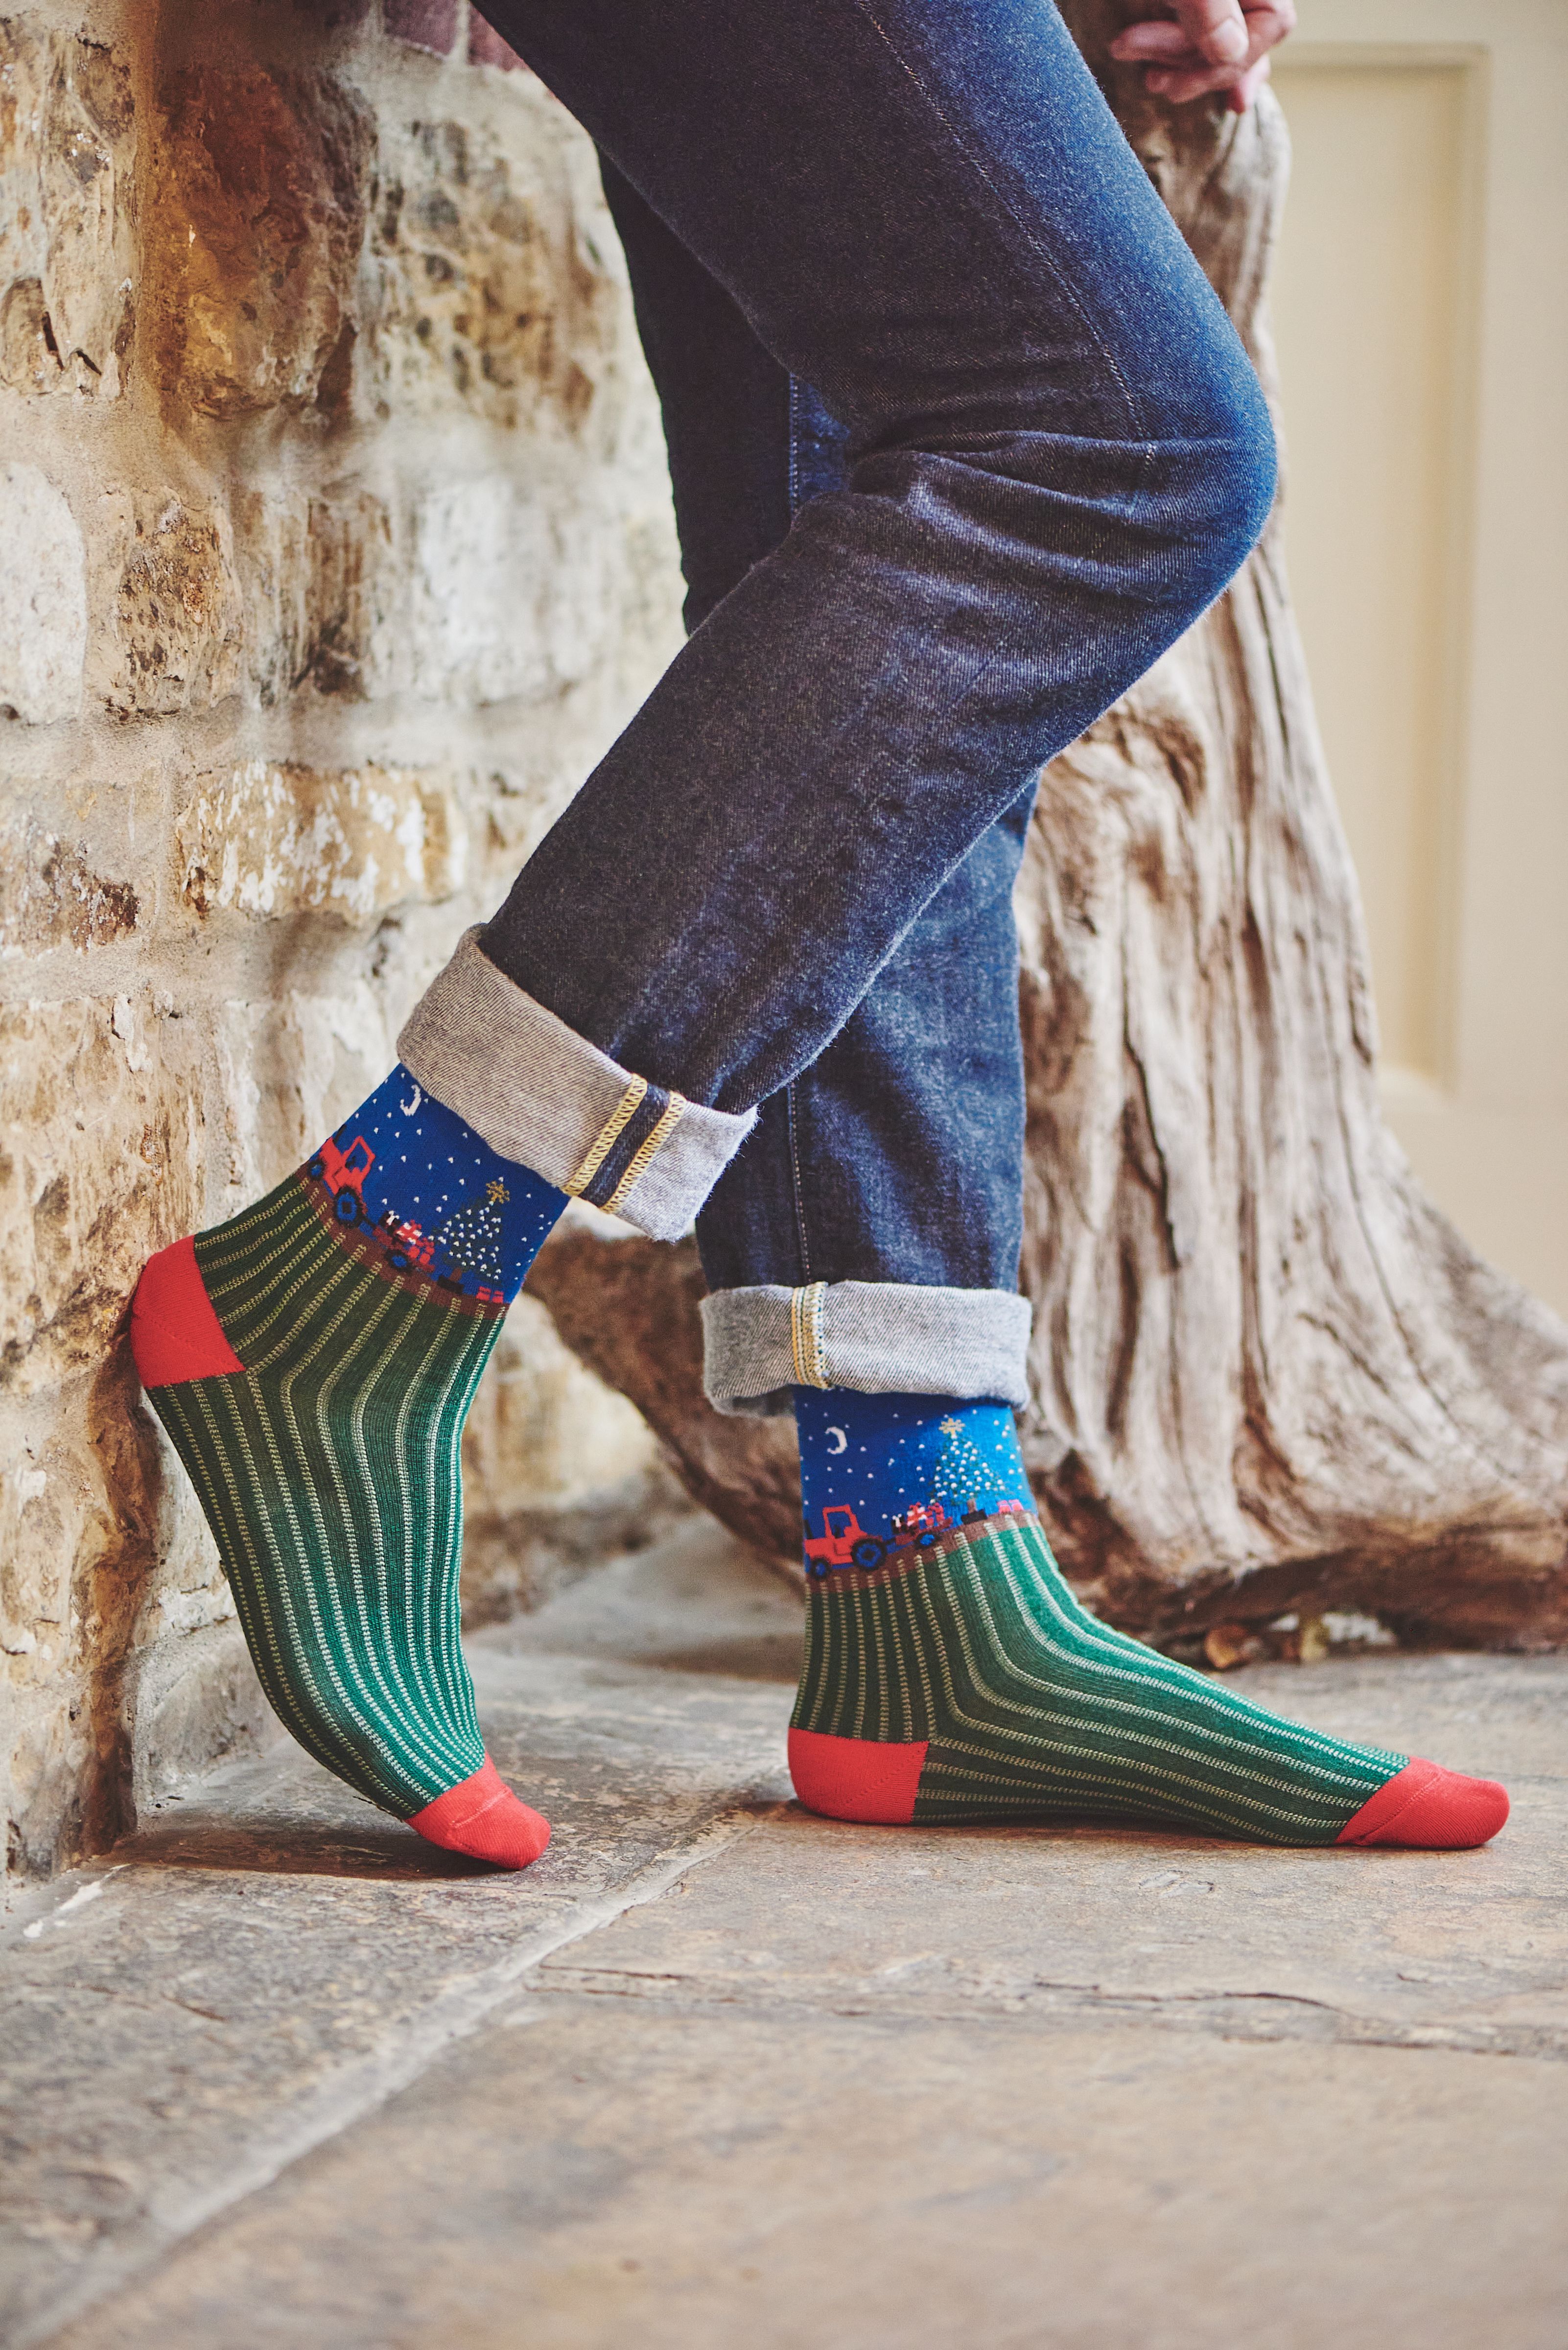 HJ Hall’s return to GLEE with festive, fun, and functional new socks